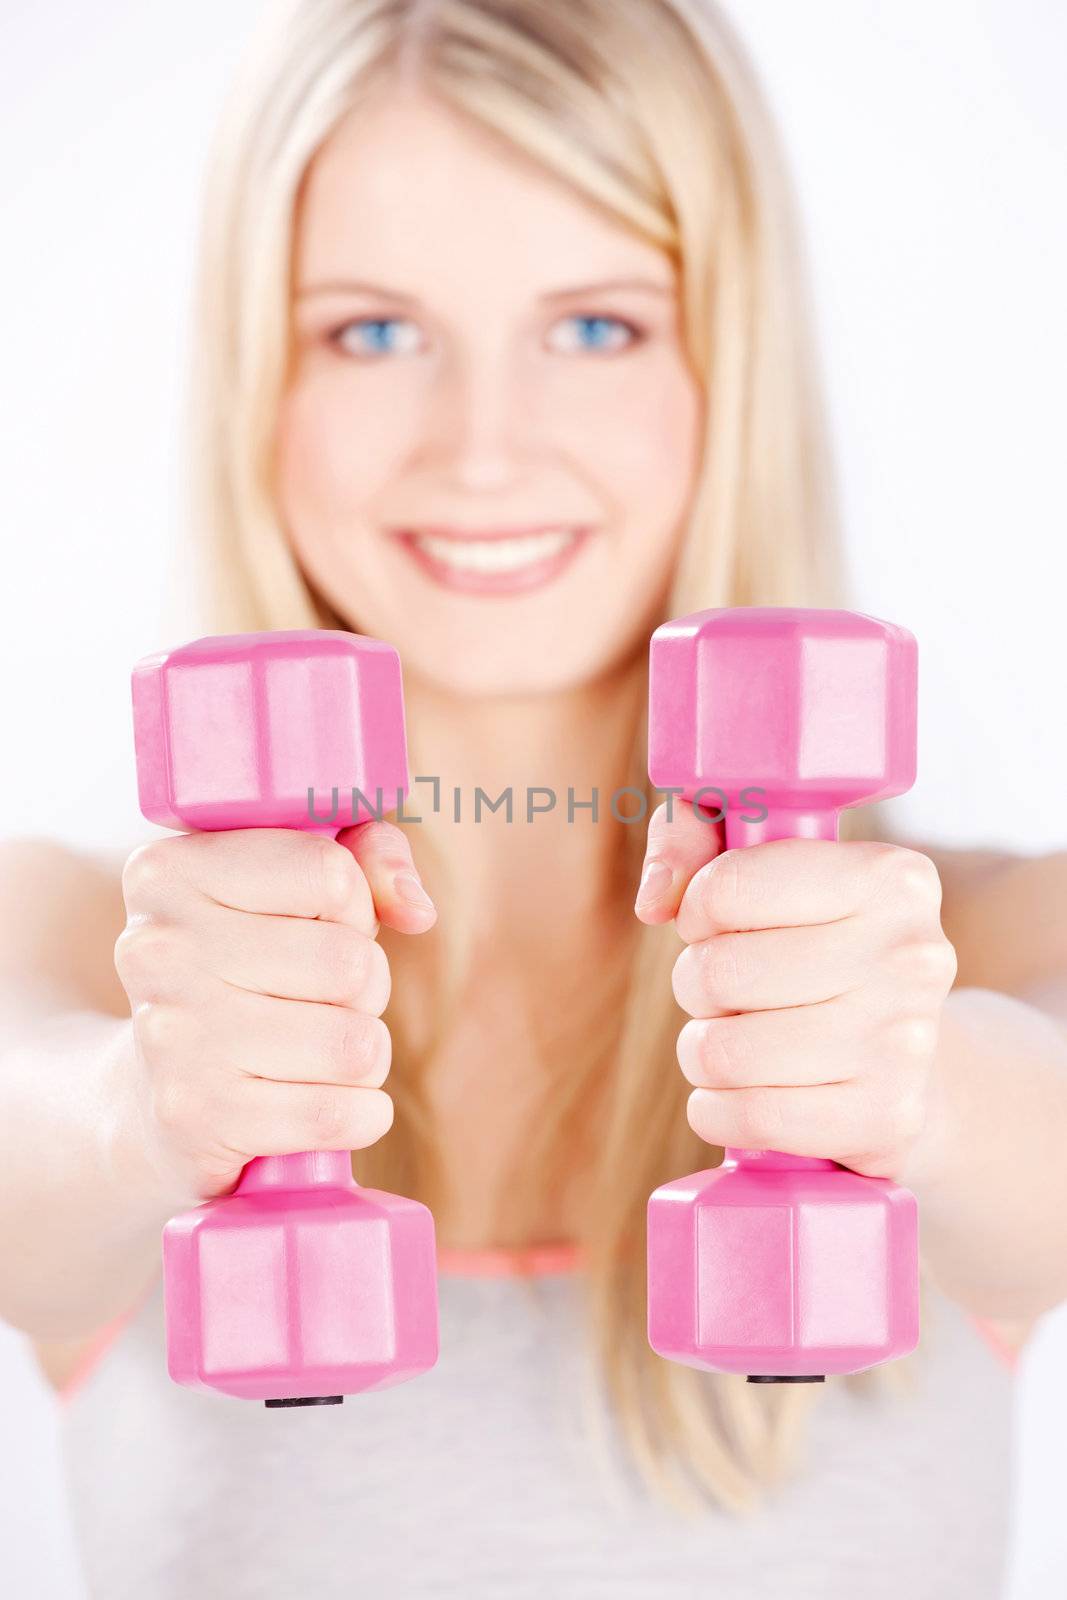 Young woman with two weights doing fitness exercises, focus on weights